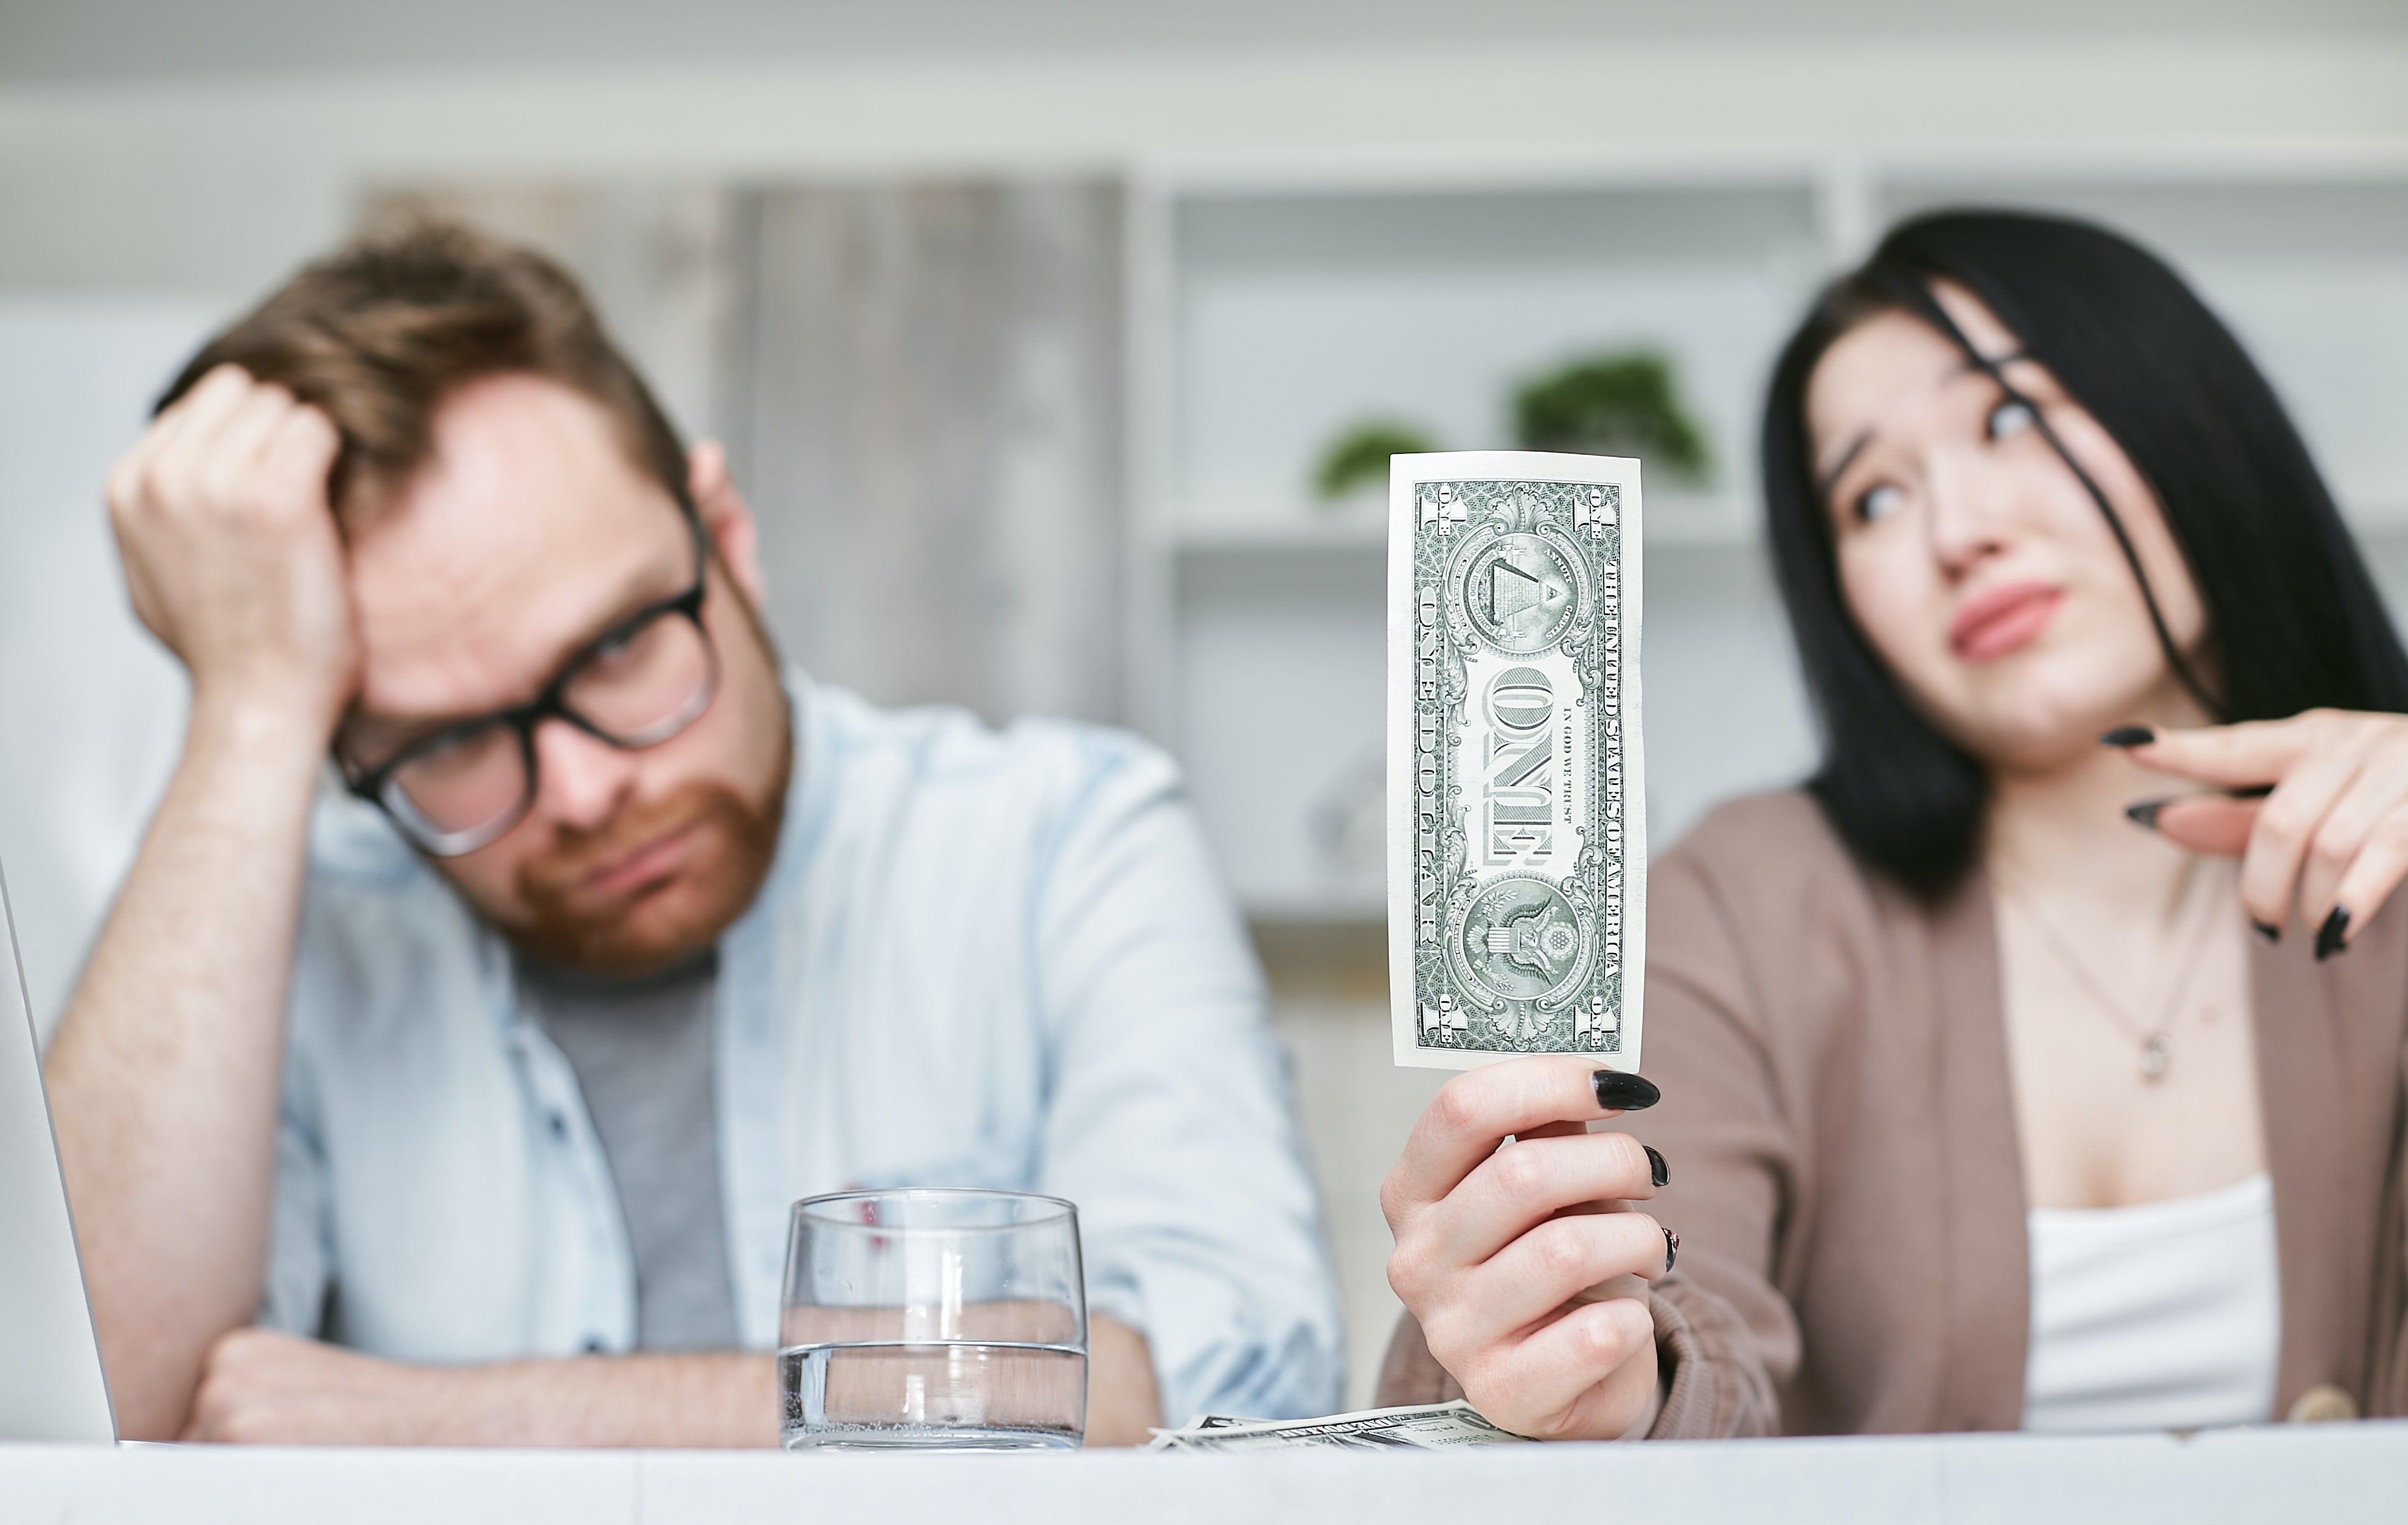 A frustrated couple sitting at the table with the woman holding a dollar bill | Source: Pexels